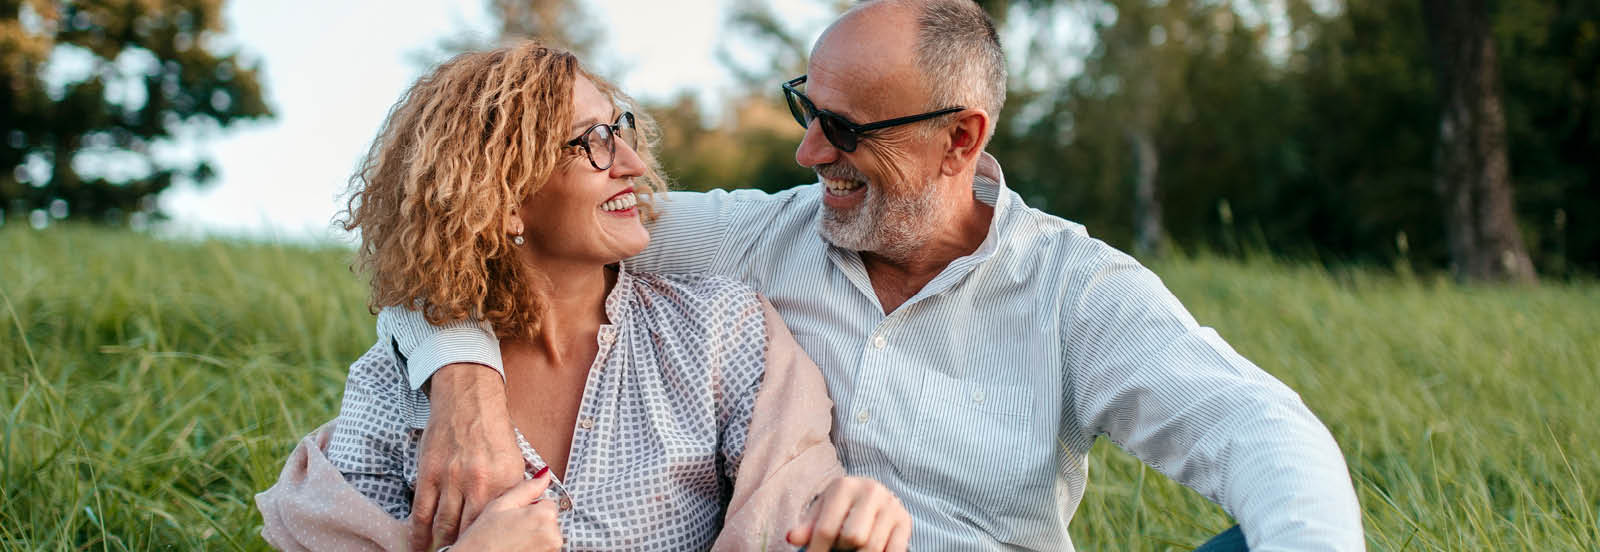 middle age man and woman with glasses  smiling at each other outdoors 1600x552.jpg